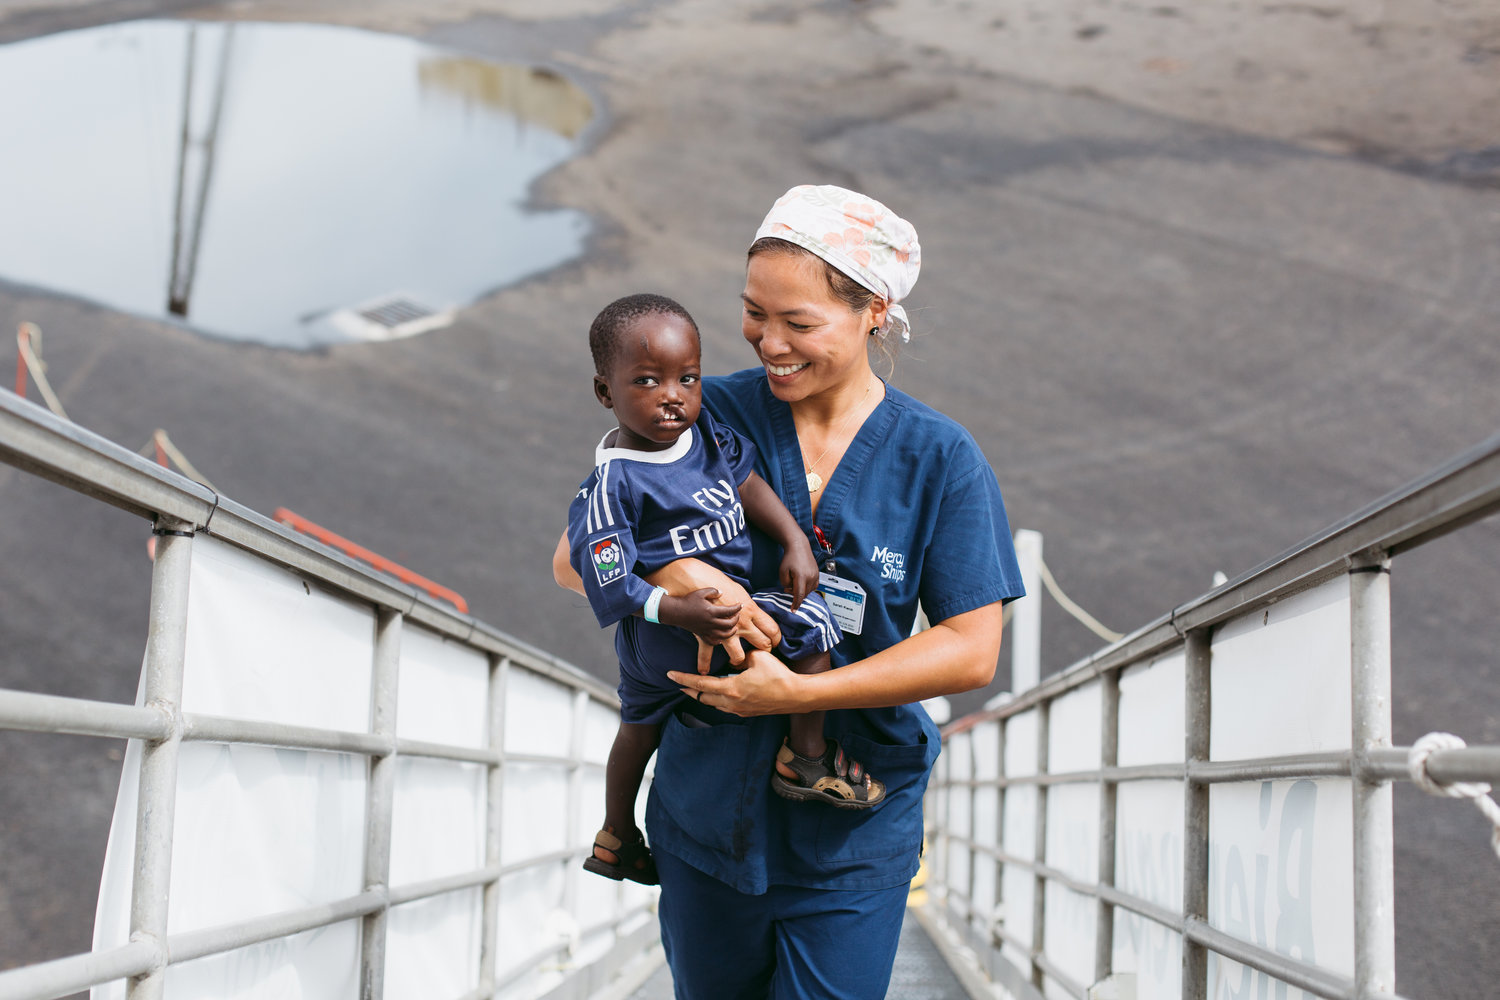 Sarah Kwok, Anesthesia Supervisor, carries cleft lip patient, Saliou up the ship's gangway for needed medical treatment.